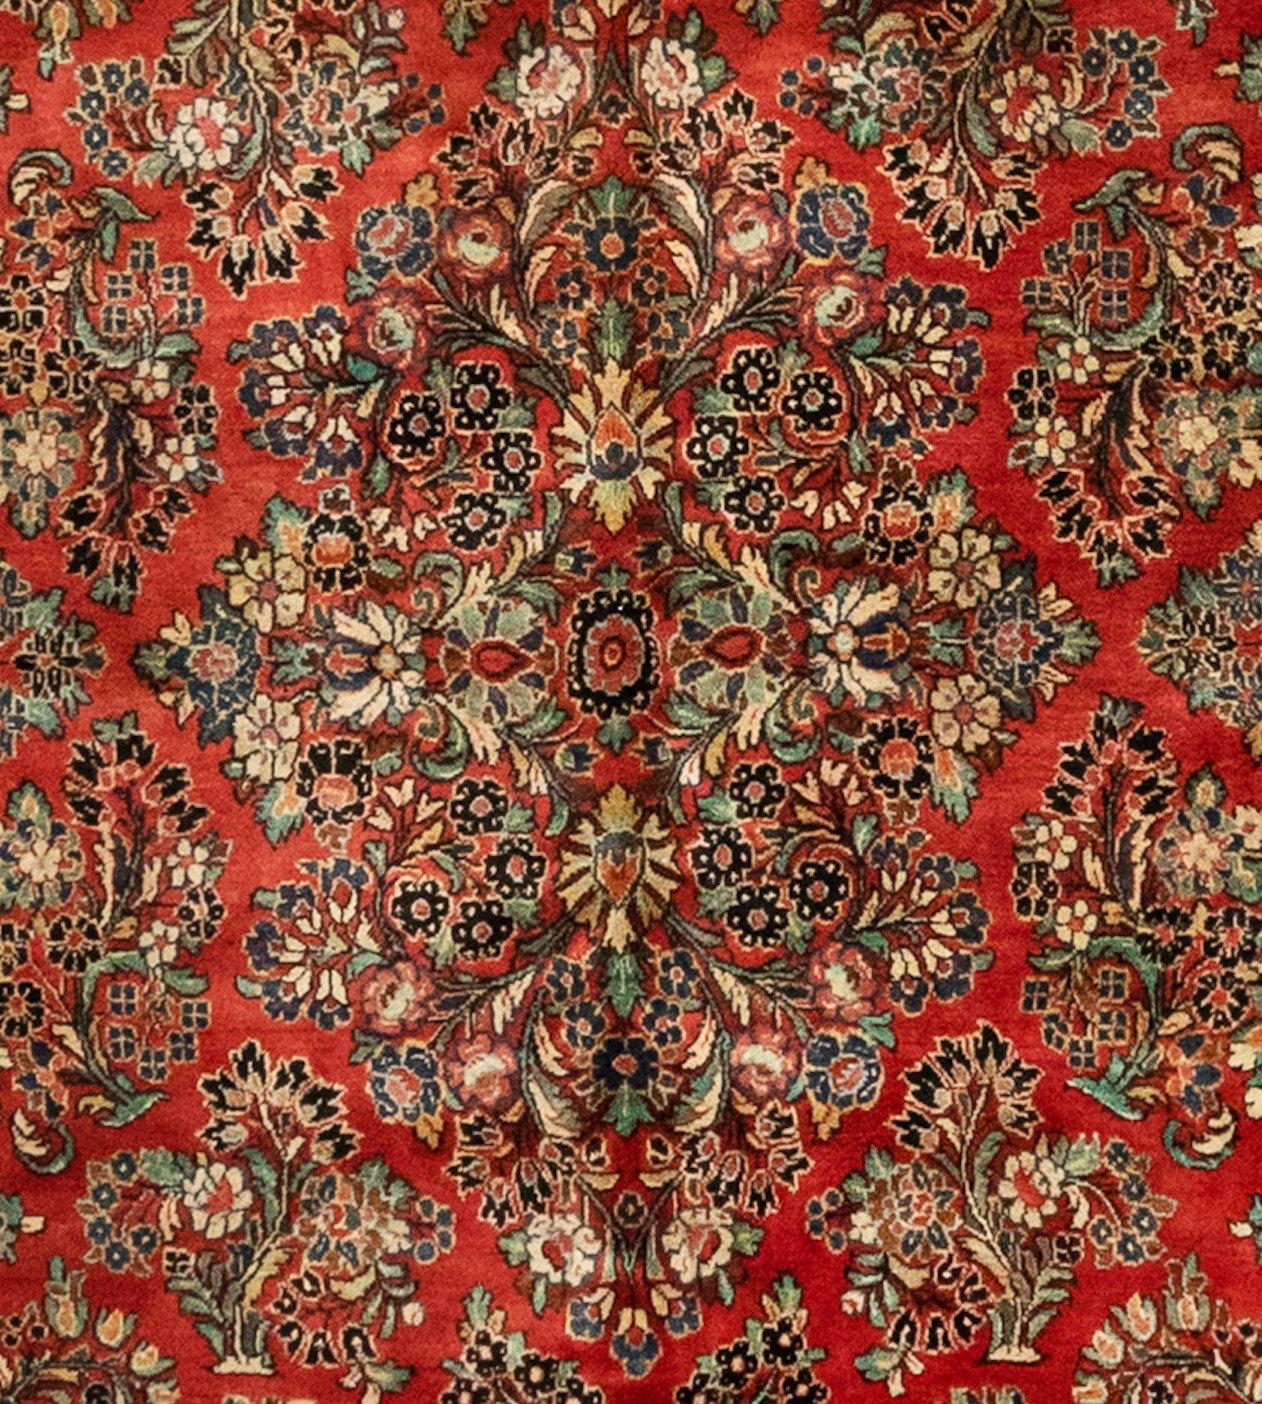 Sarouk is a small village and its neighboring villages in Northwestern Iran. Most Sarouk carpets follow a very distinctive design and is depended on floral sprays and bouquets. 

This is a fine example of an antique Sarouk carpet dating from the